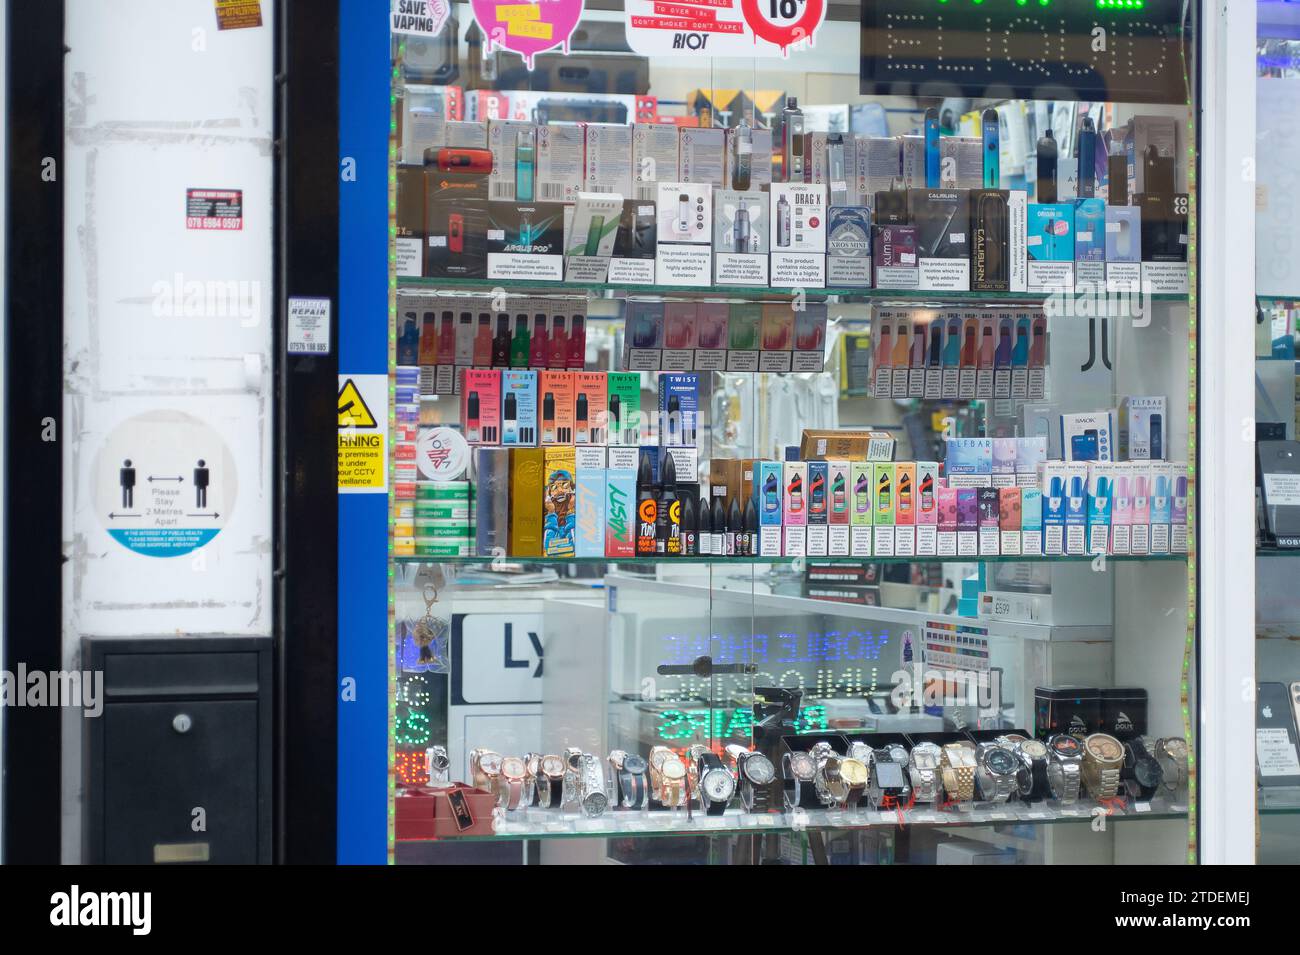 Slough, Berkshire, UK. 16th December, 2023. Vape advertising in a shop in Slough, Berkshire. The World Health Organisation has called for flavoured vapes to be banned worldwide. They have said  that 'urgent measures' are were needed to control e-cigarettes. There are many ex smokers who are now hooked on vaping. Credit: Maureen McLean/Alamy Stock Photo